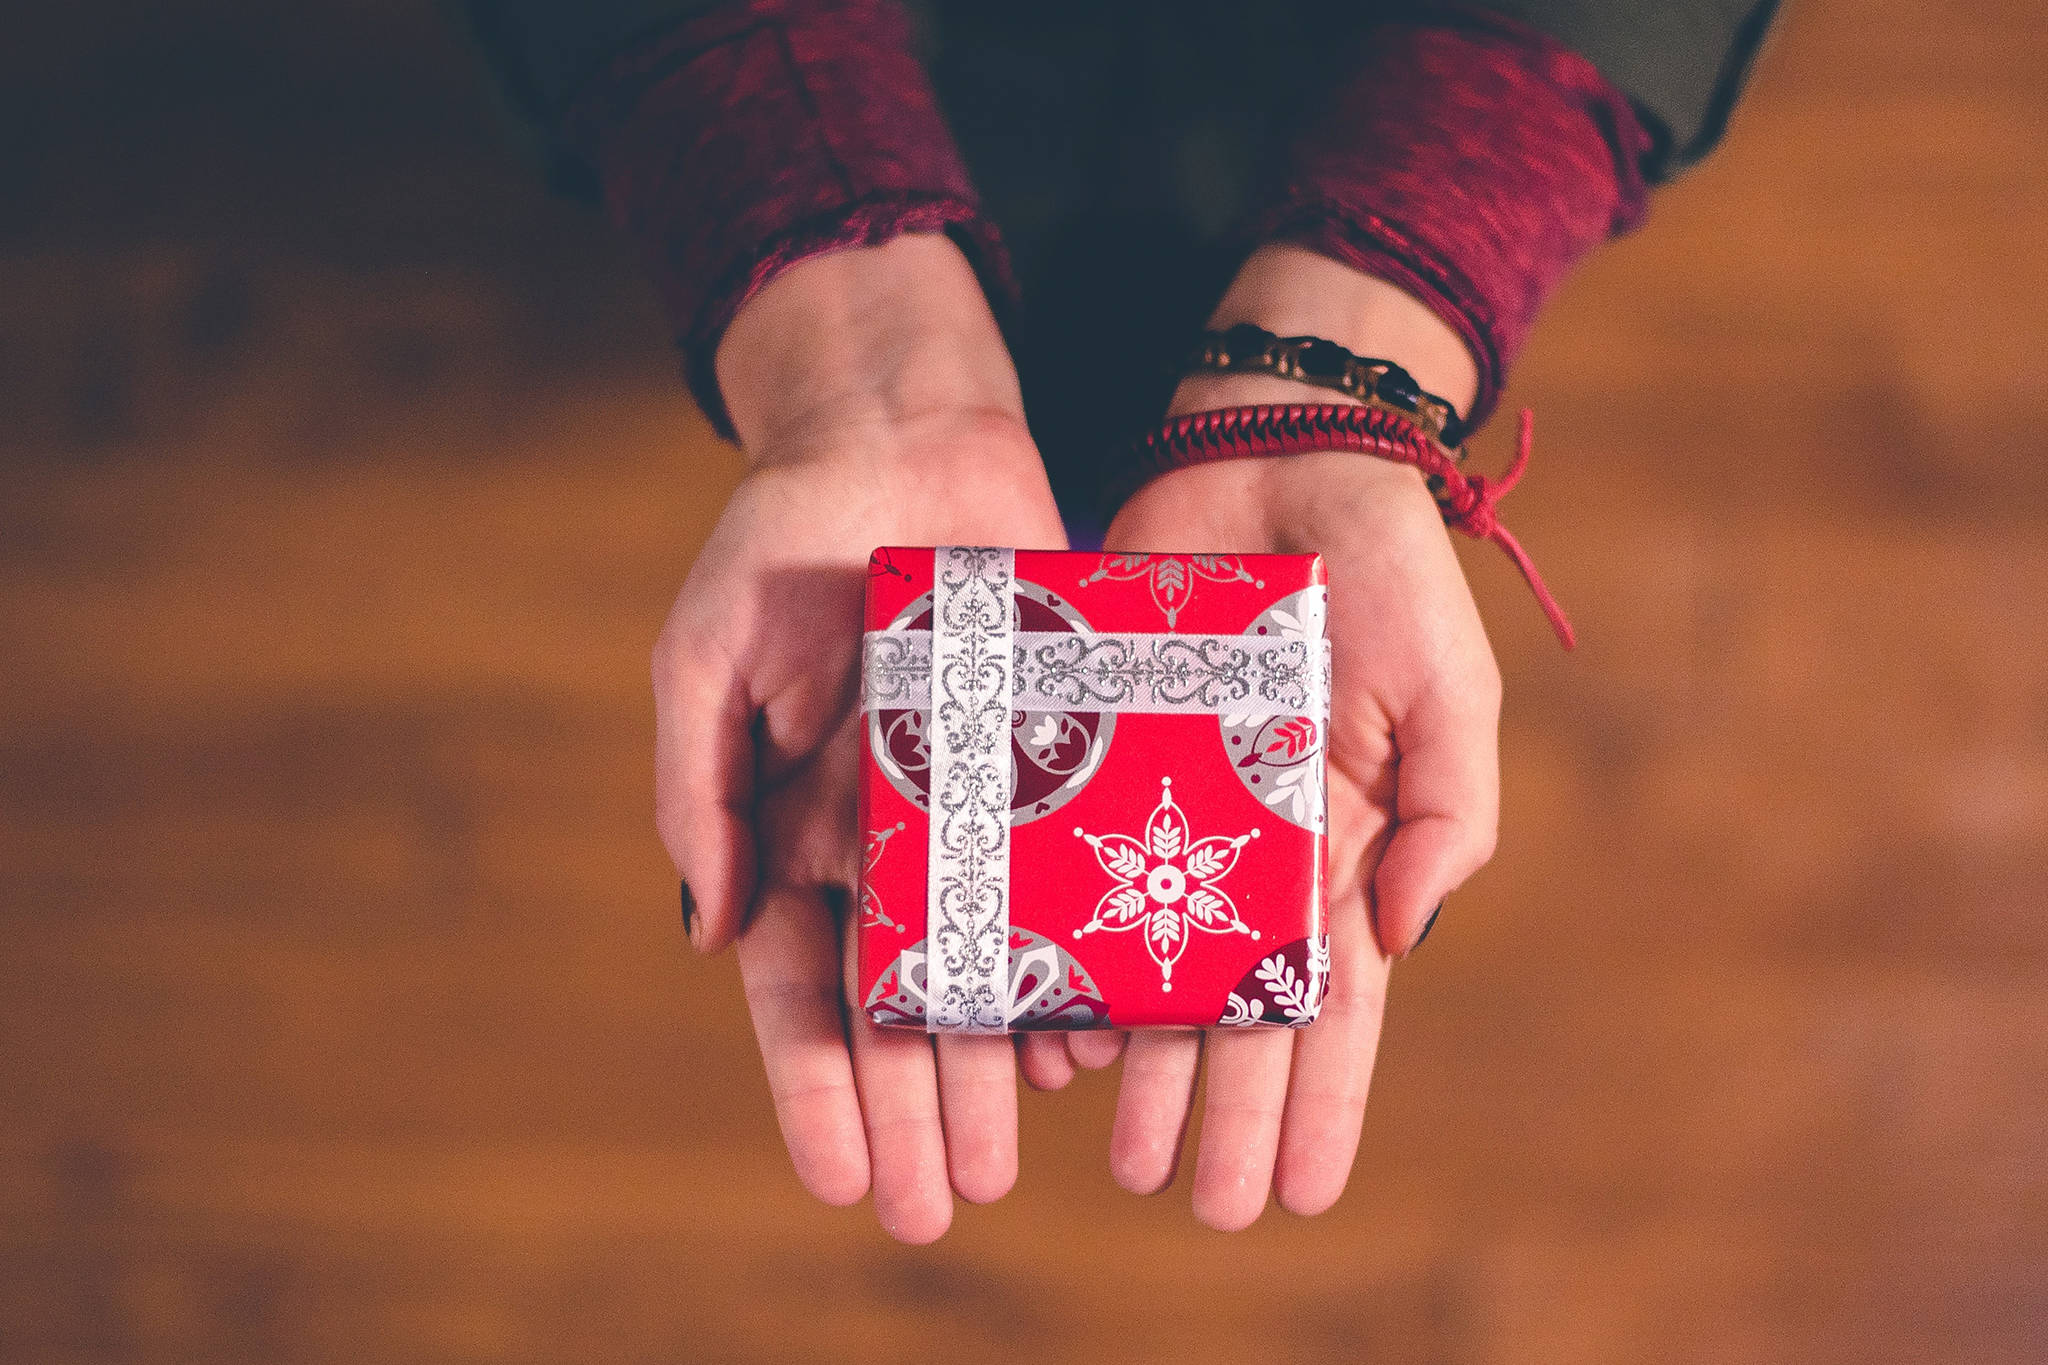 Opinion: The Christmas gift we all need